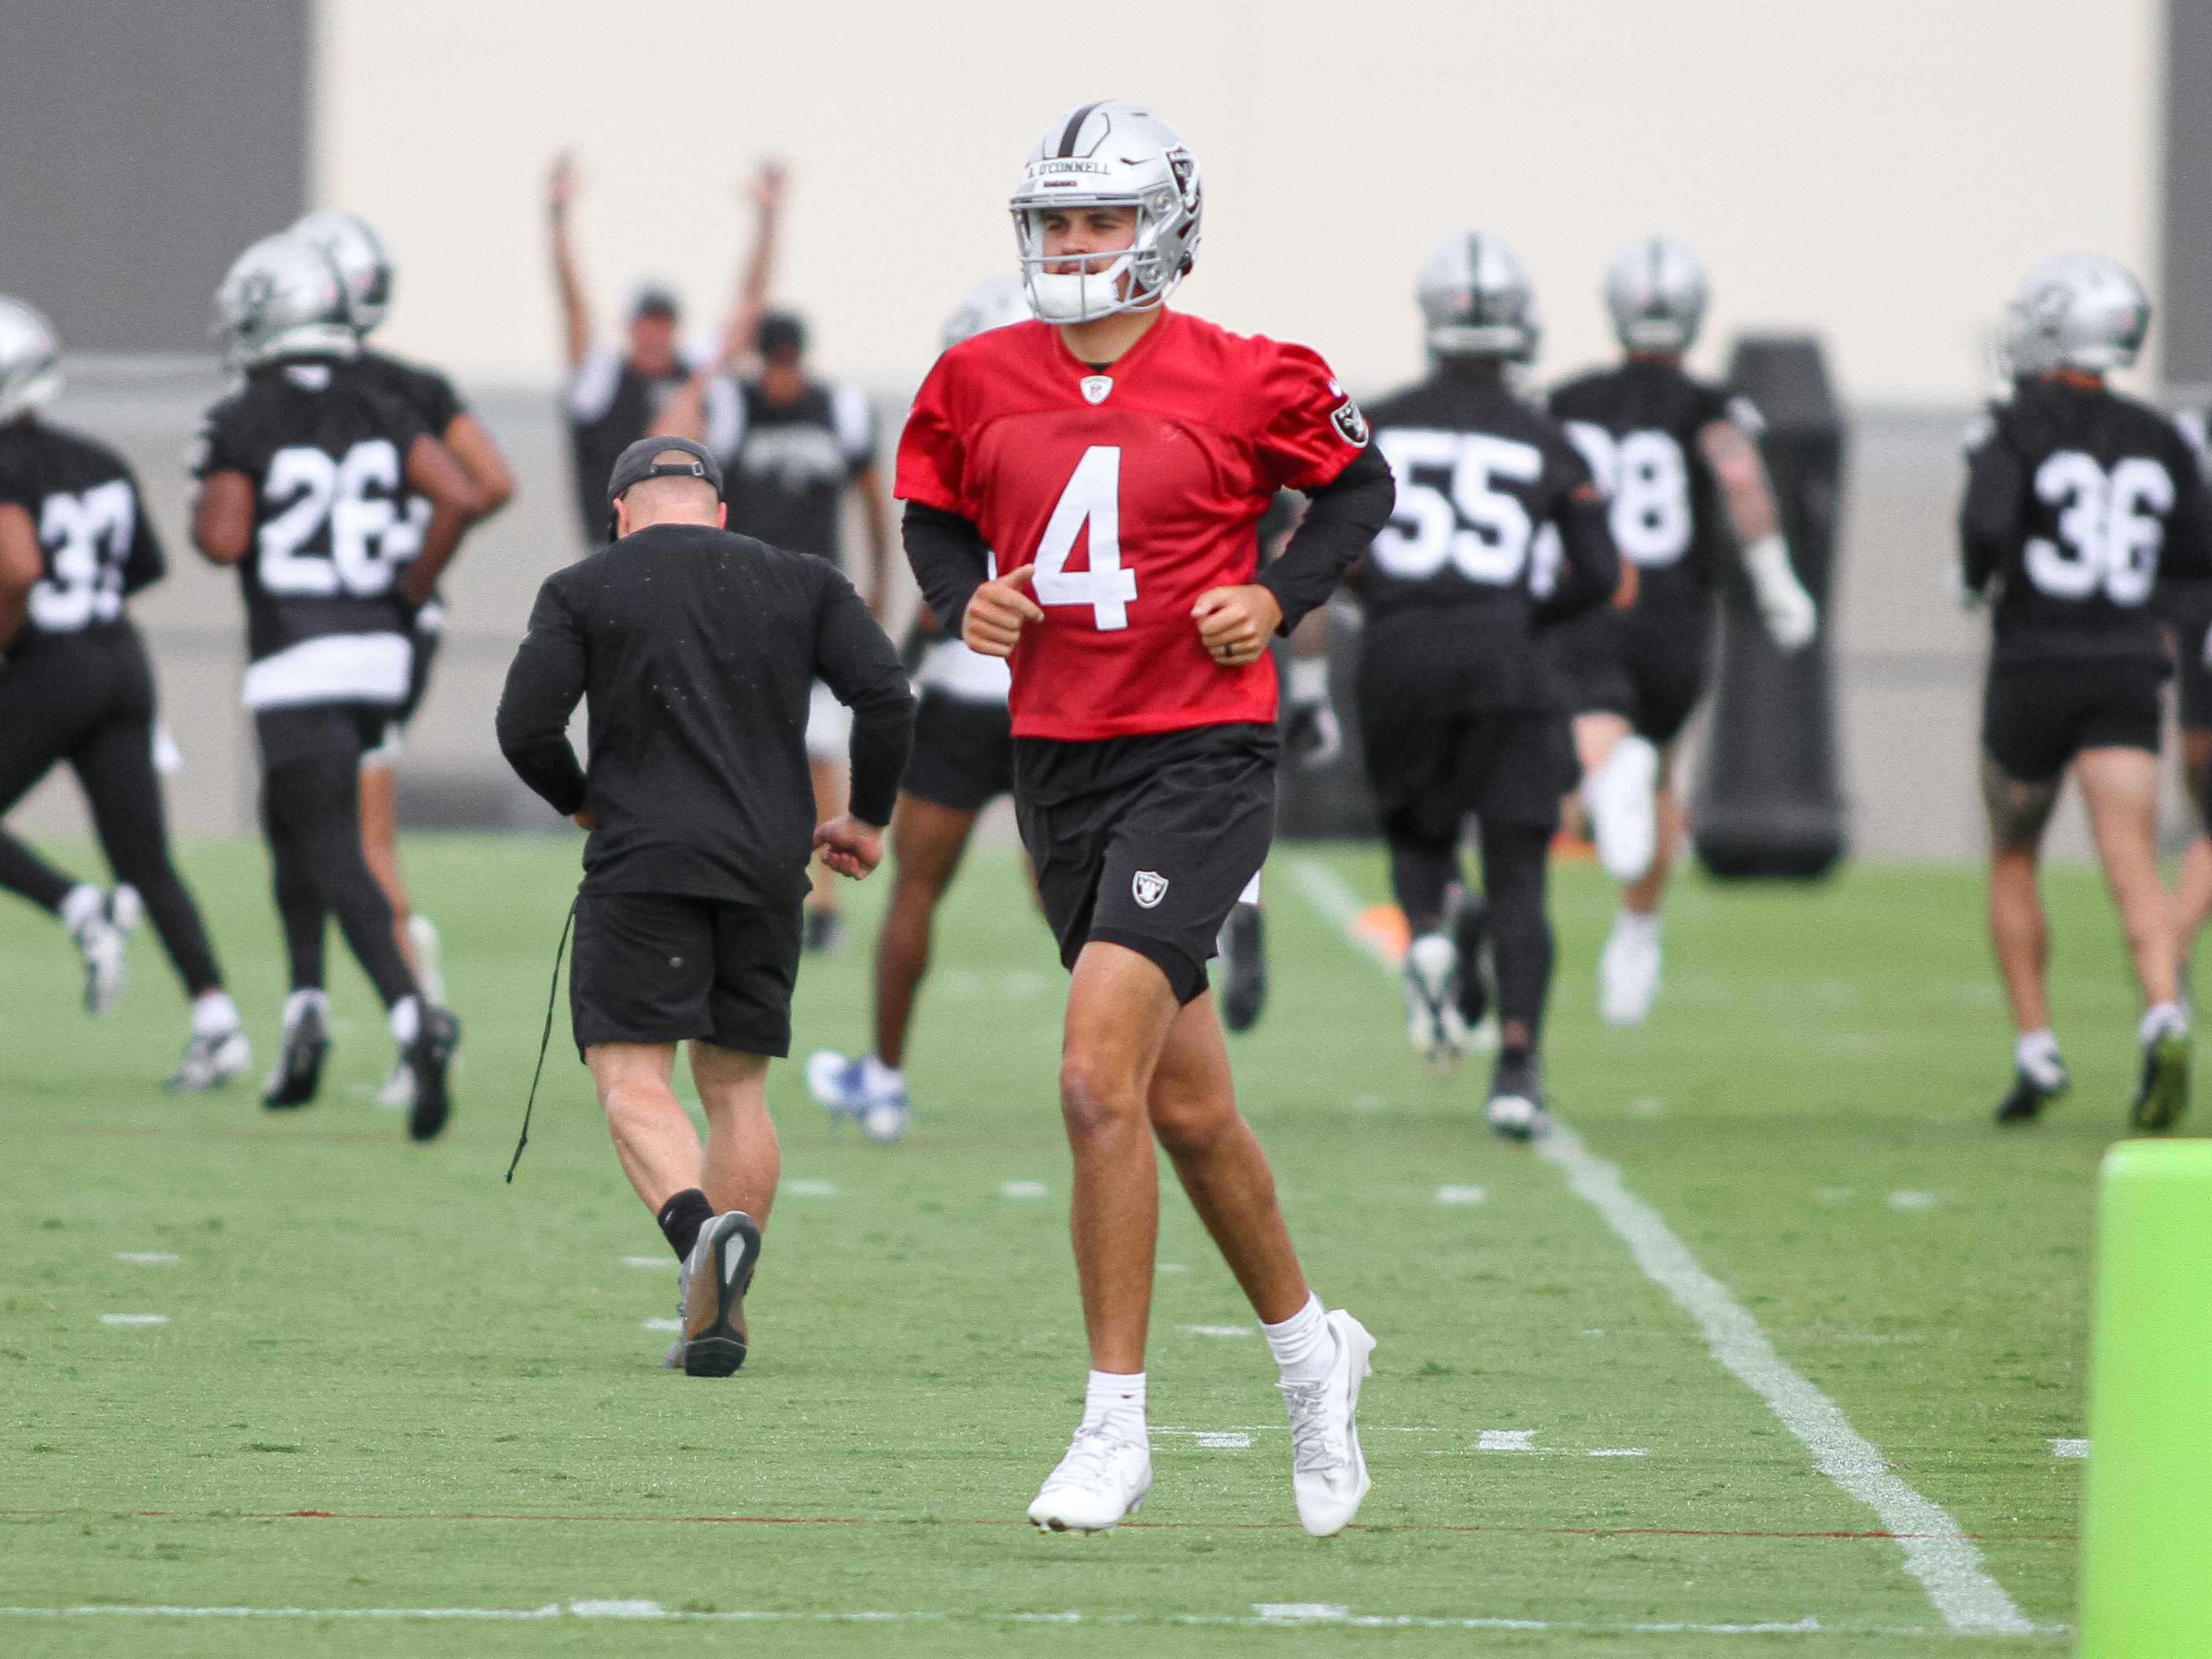 Aidan O'Connell is working hard to regain the mobility he showed at Purdue but was diminished under Josh McDaniels for the Las Vegas Raiders.